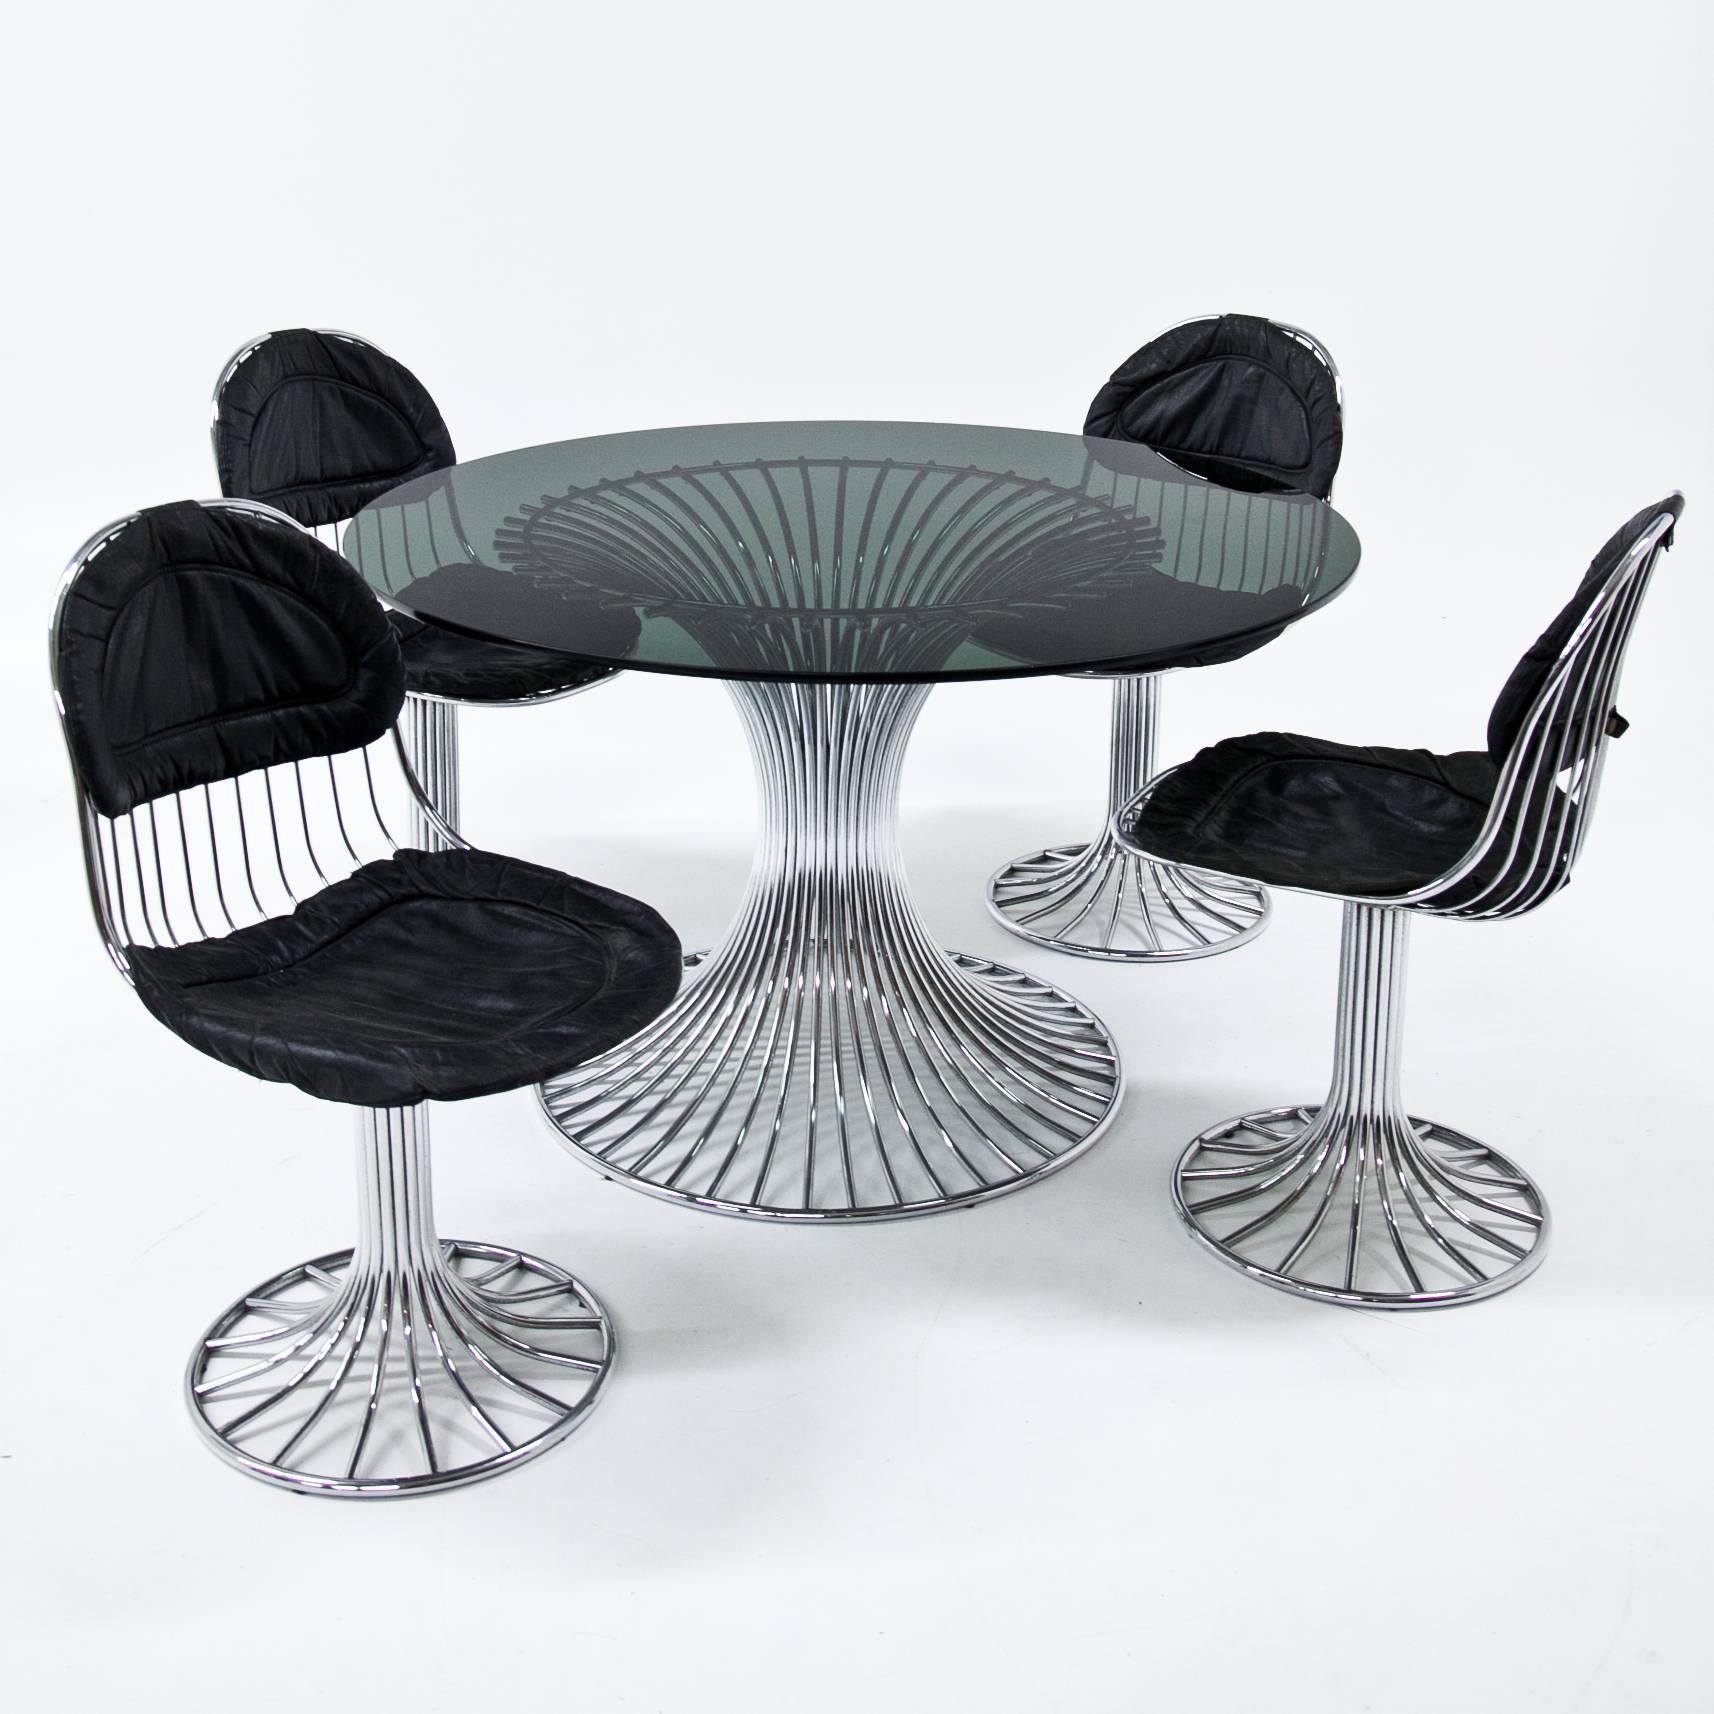 Modern dining room ensemble consisting of one table and four chairs in the style of Warren Platner. The table has a chromed metal tubular base and a circular smoked glass top. The chairs in a similar design, are upholstered with black leather